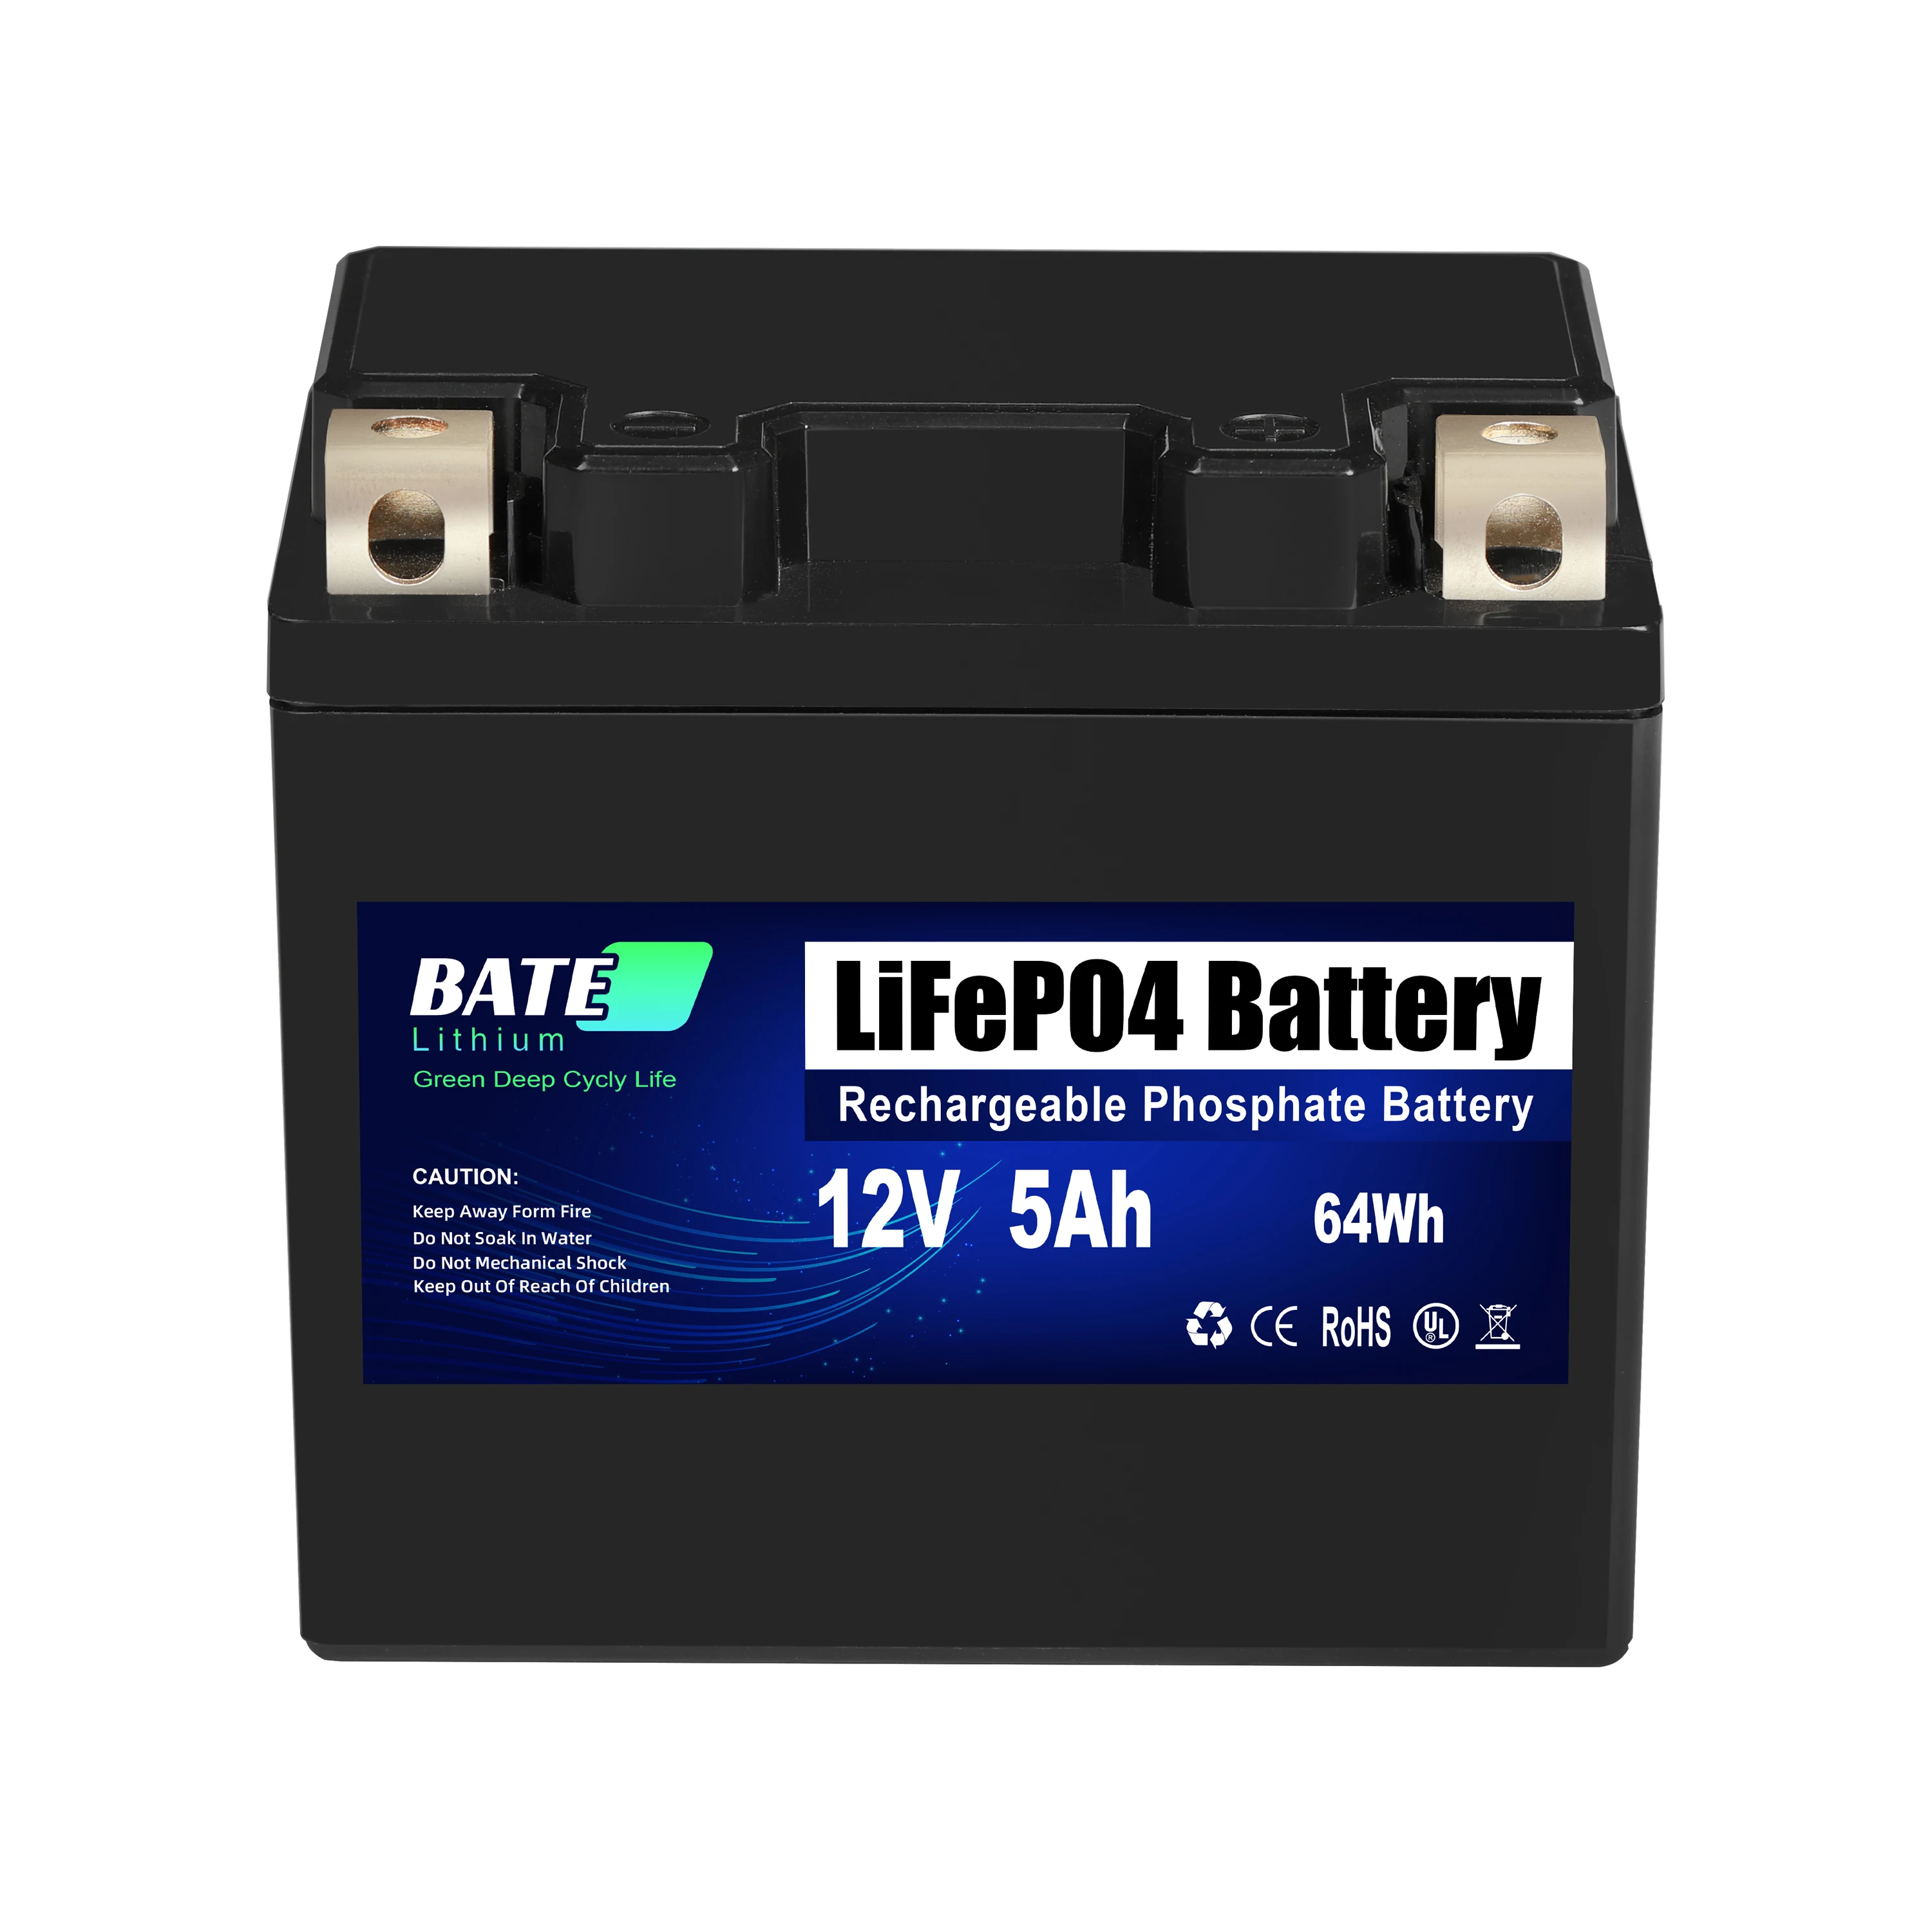 How to make 12V 5Ah Lithium battery